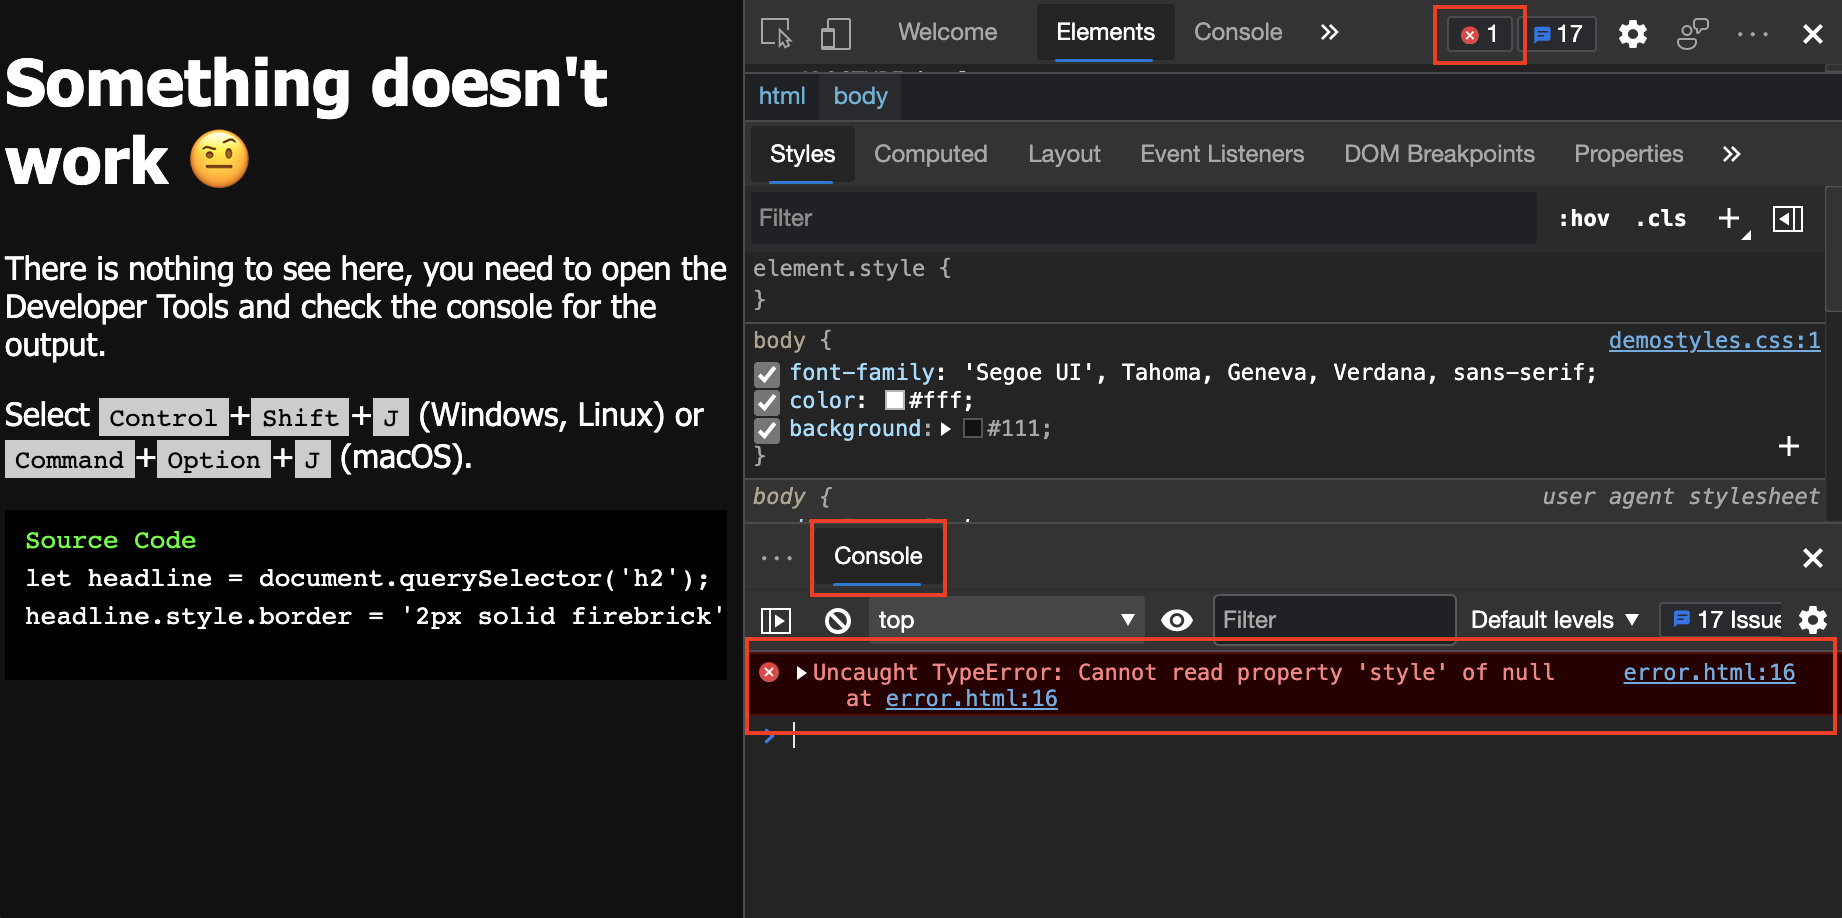 DevTools gives detailed information about the error in the Console.